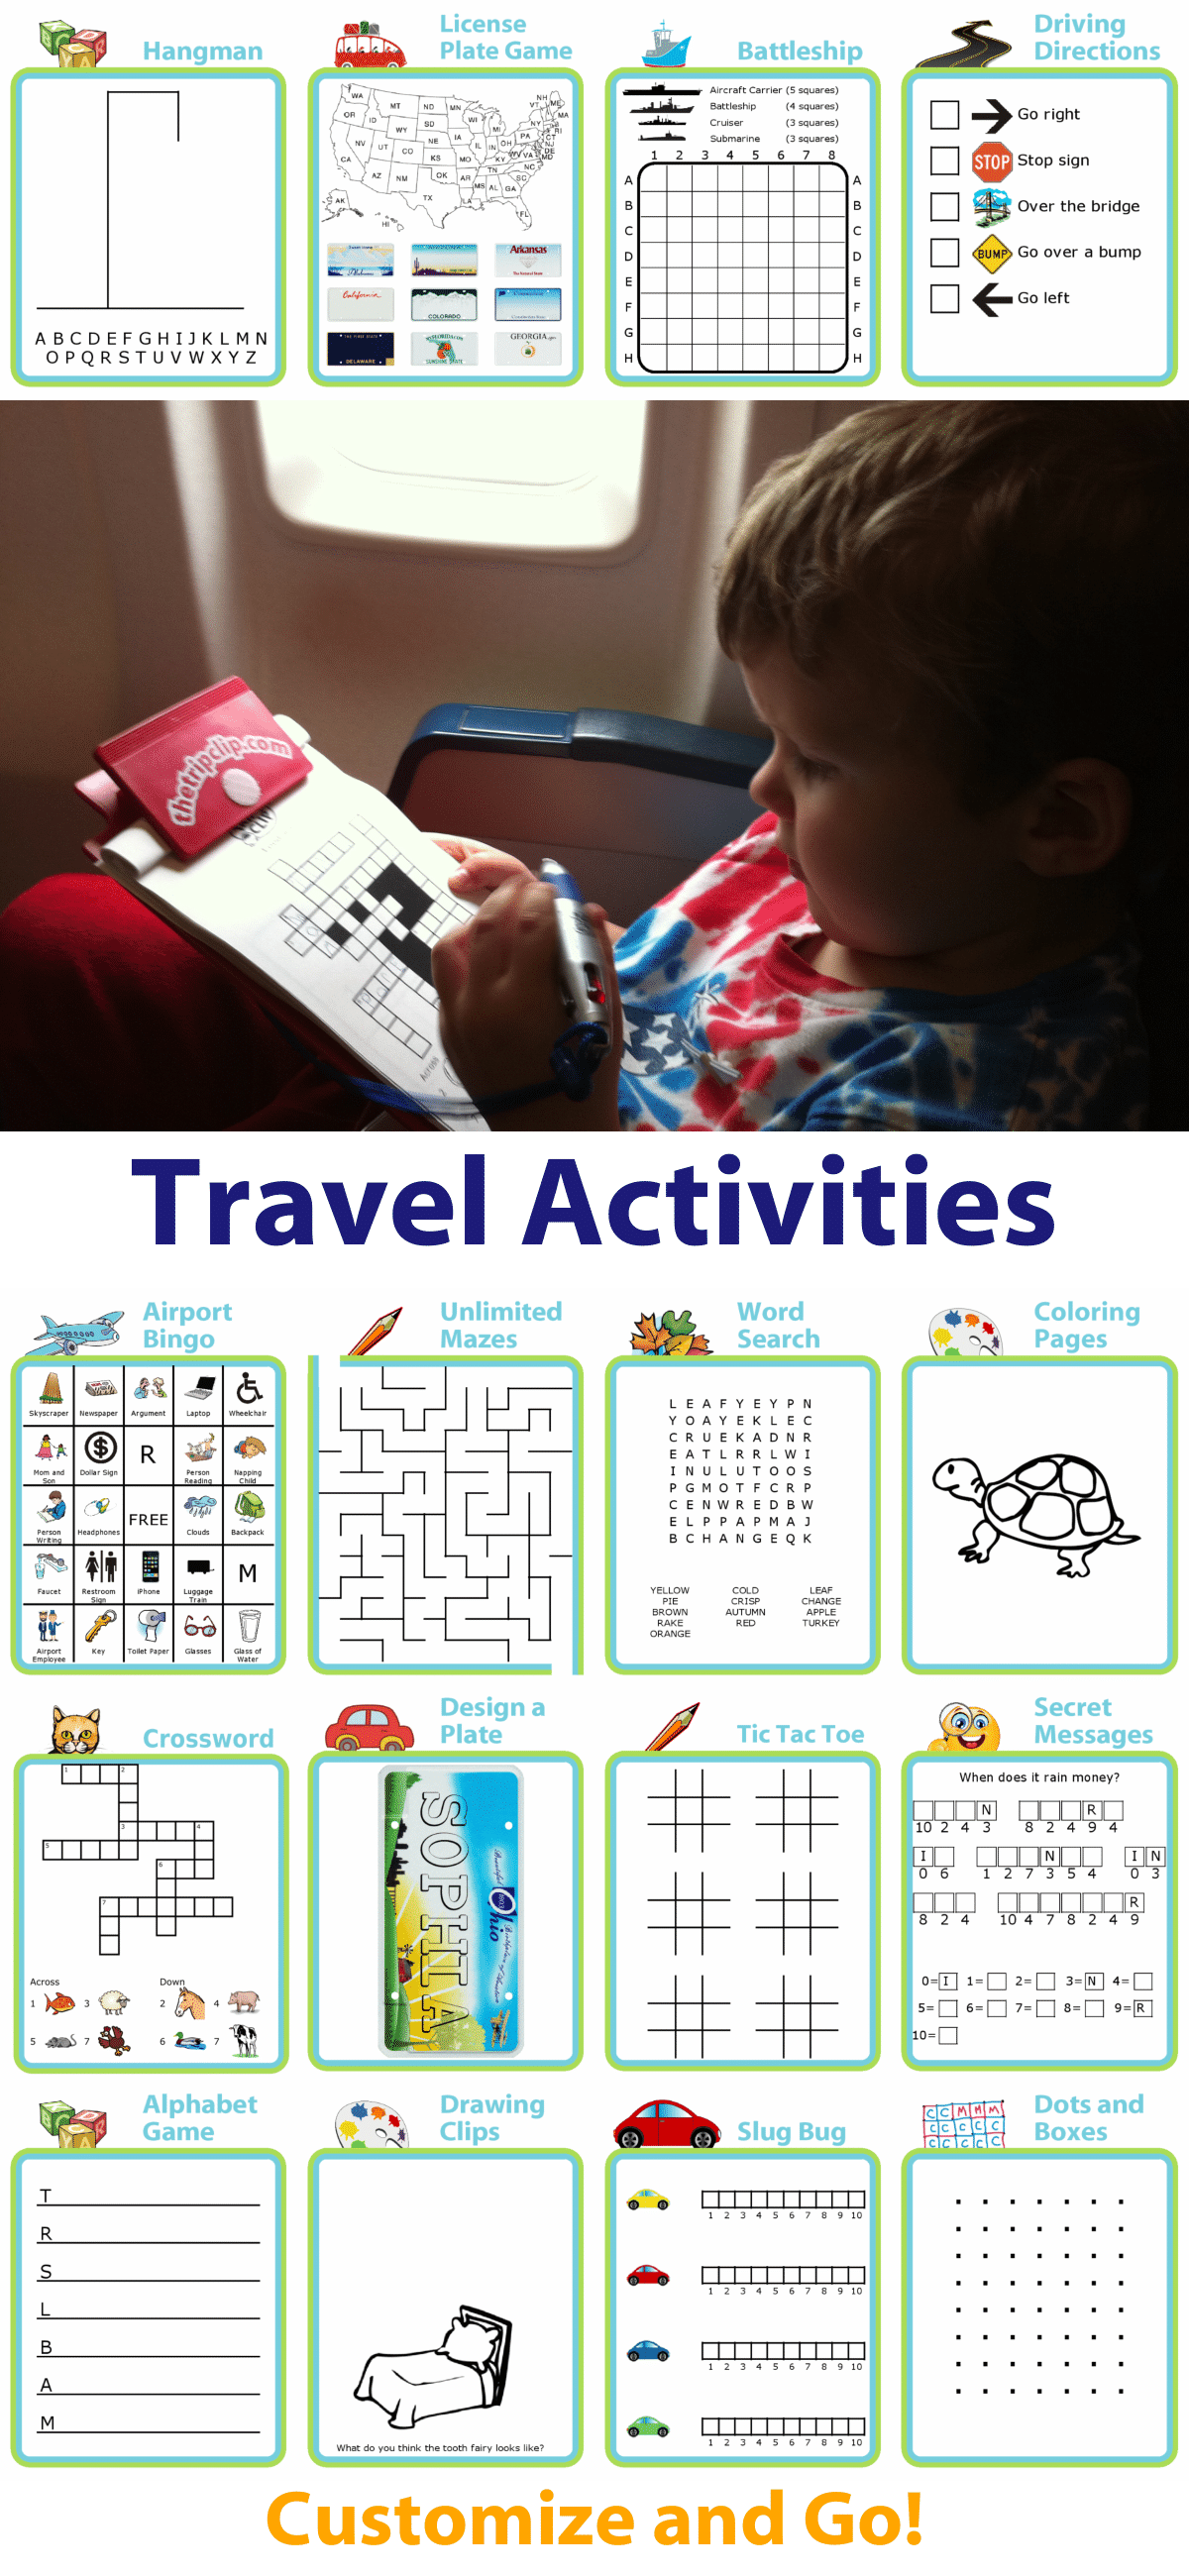 Printable travel activities: packing list, BINGO, mazes, word search, coloring, crosswords, license plates and more